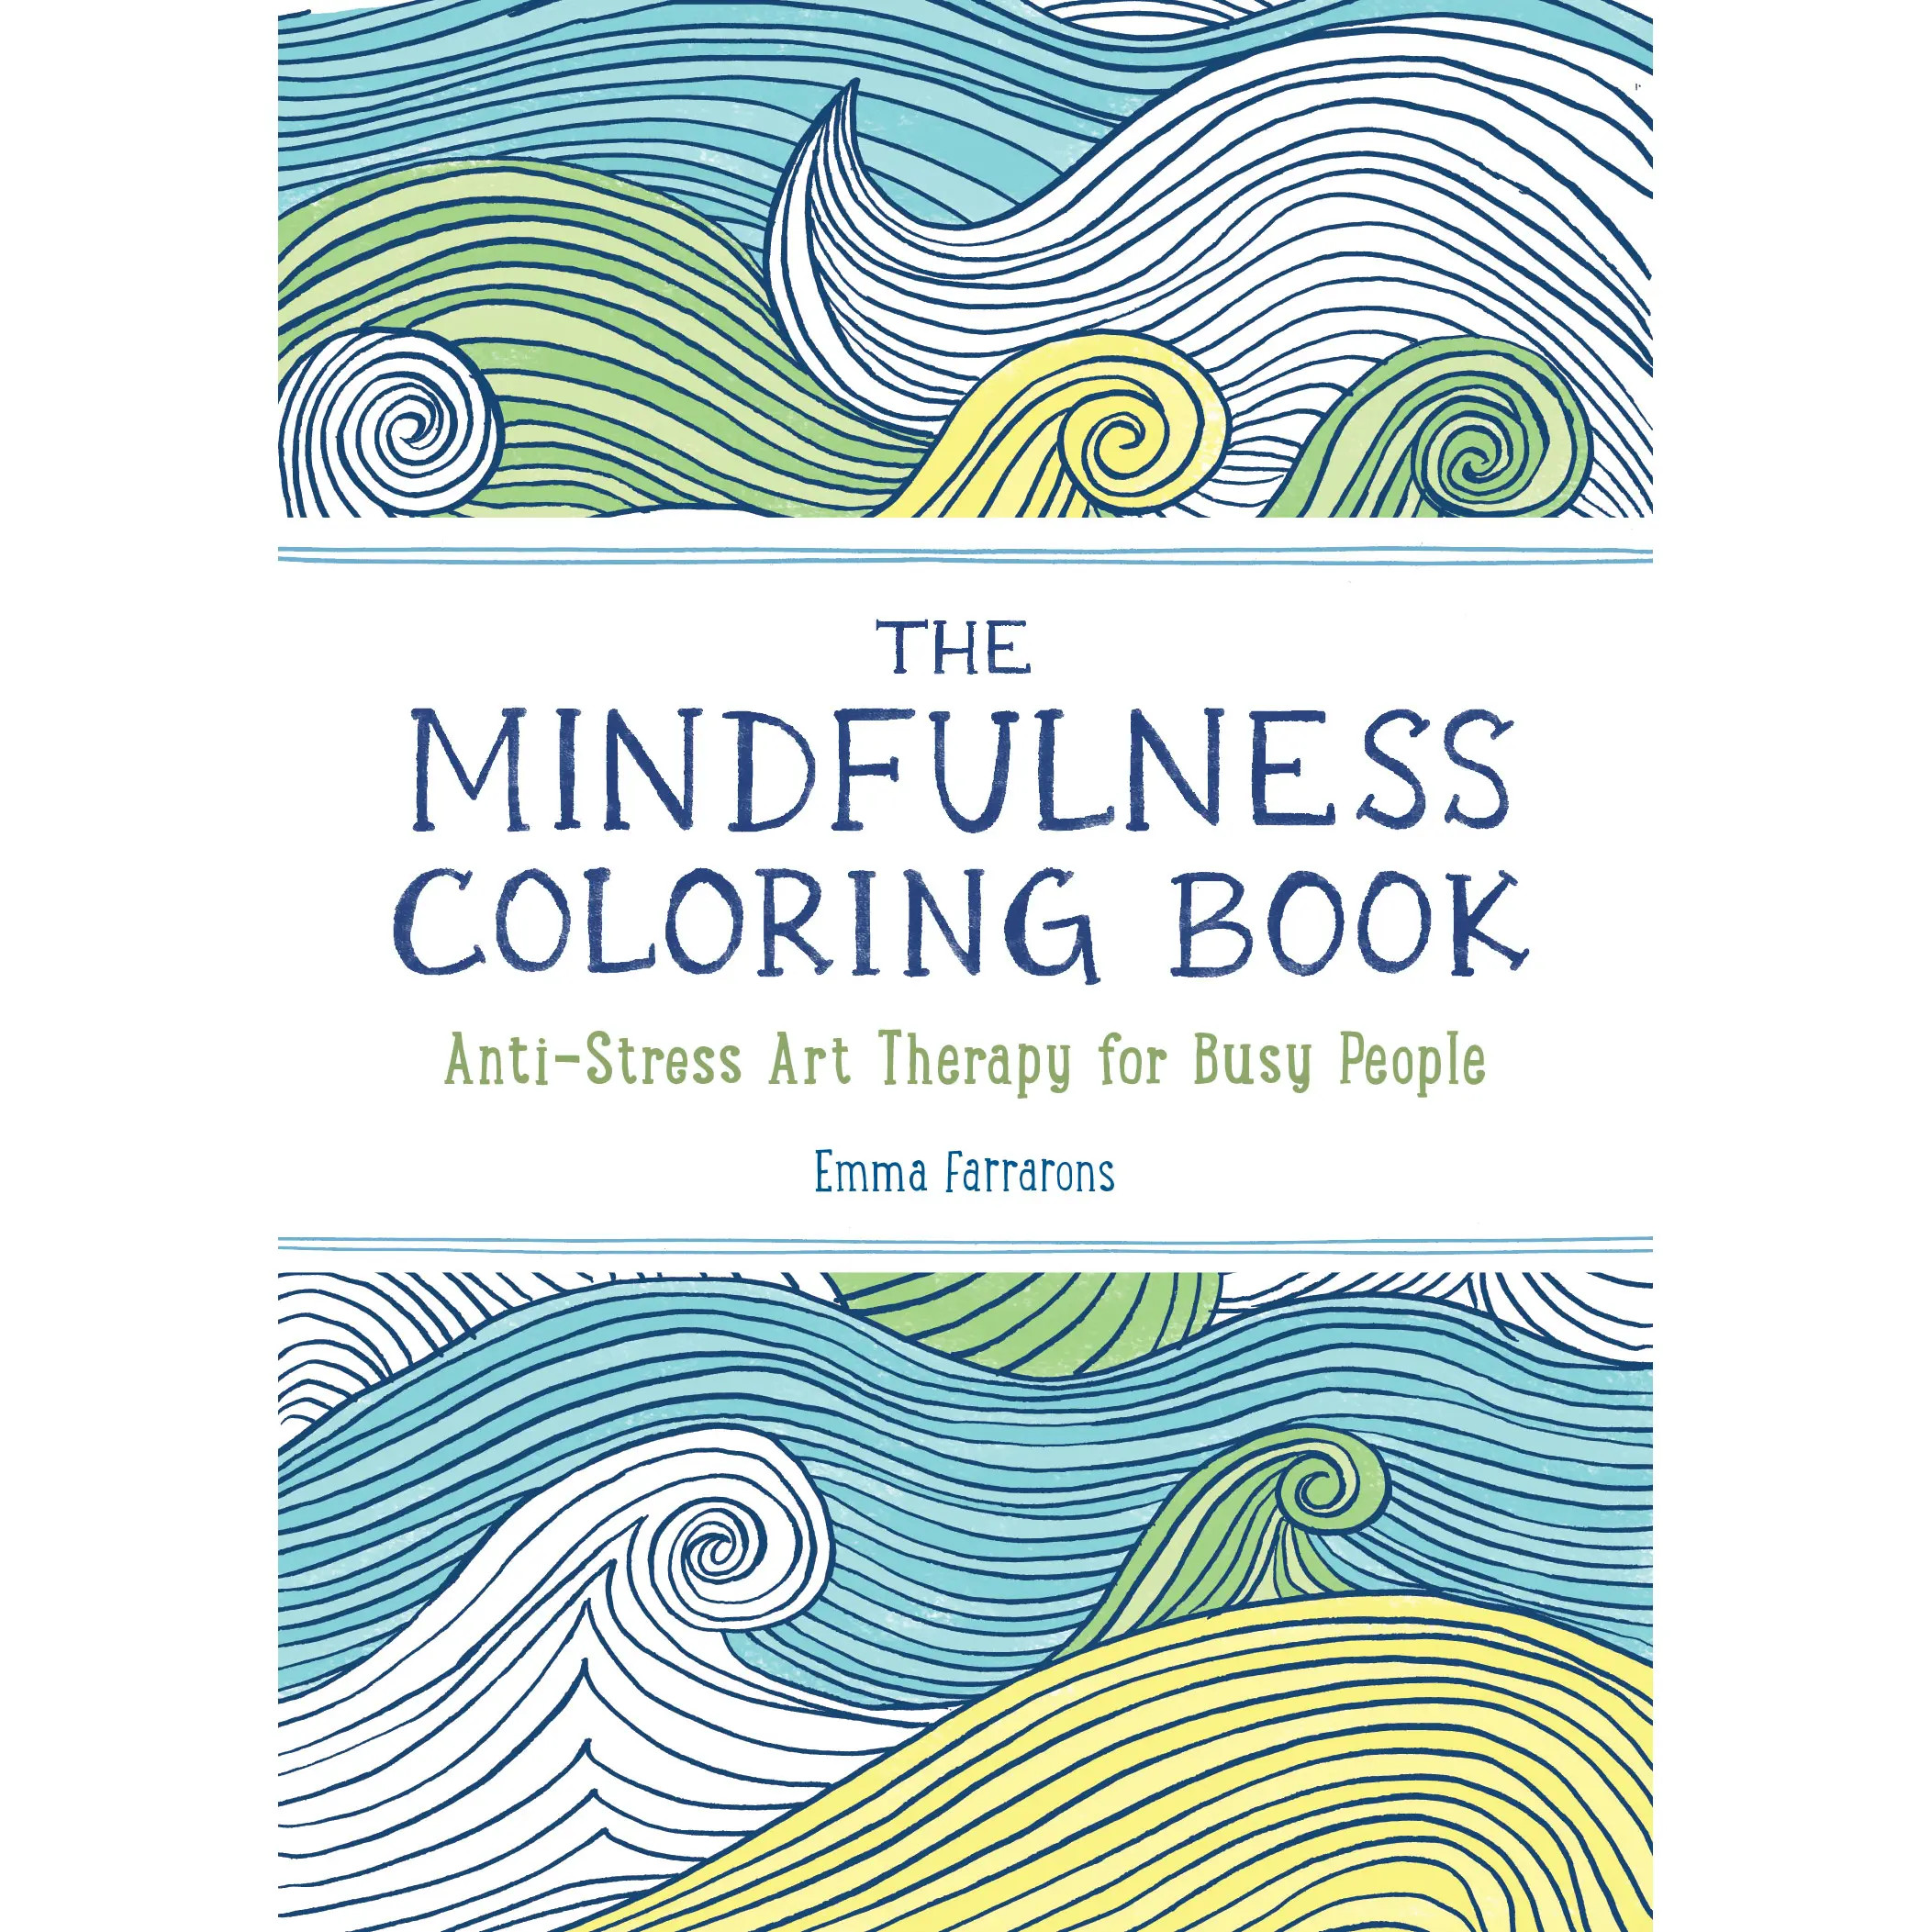 The Mindfulness Coloring Book - FLAX art & design